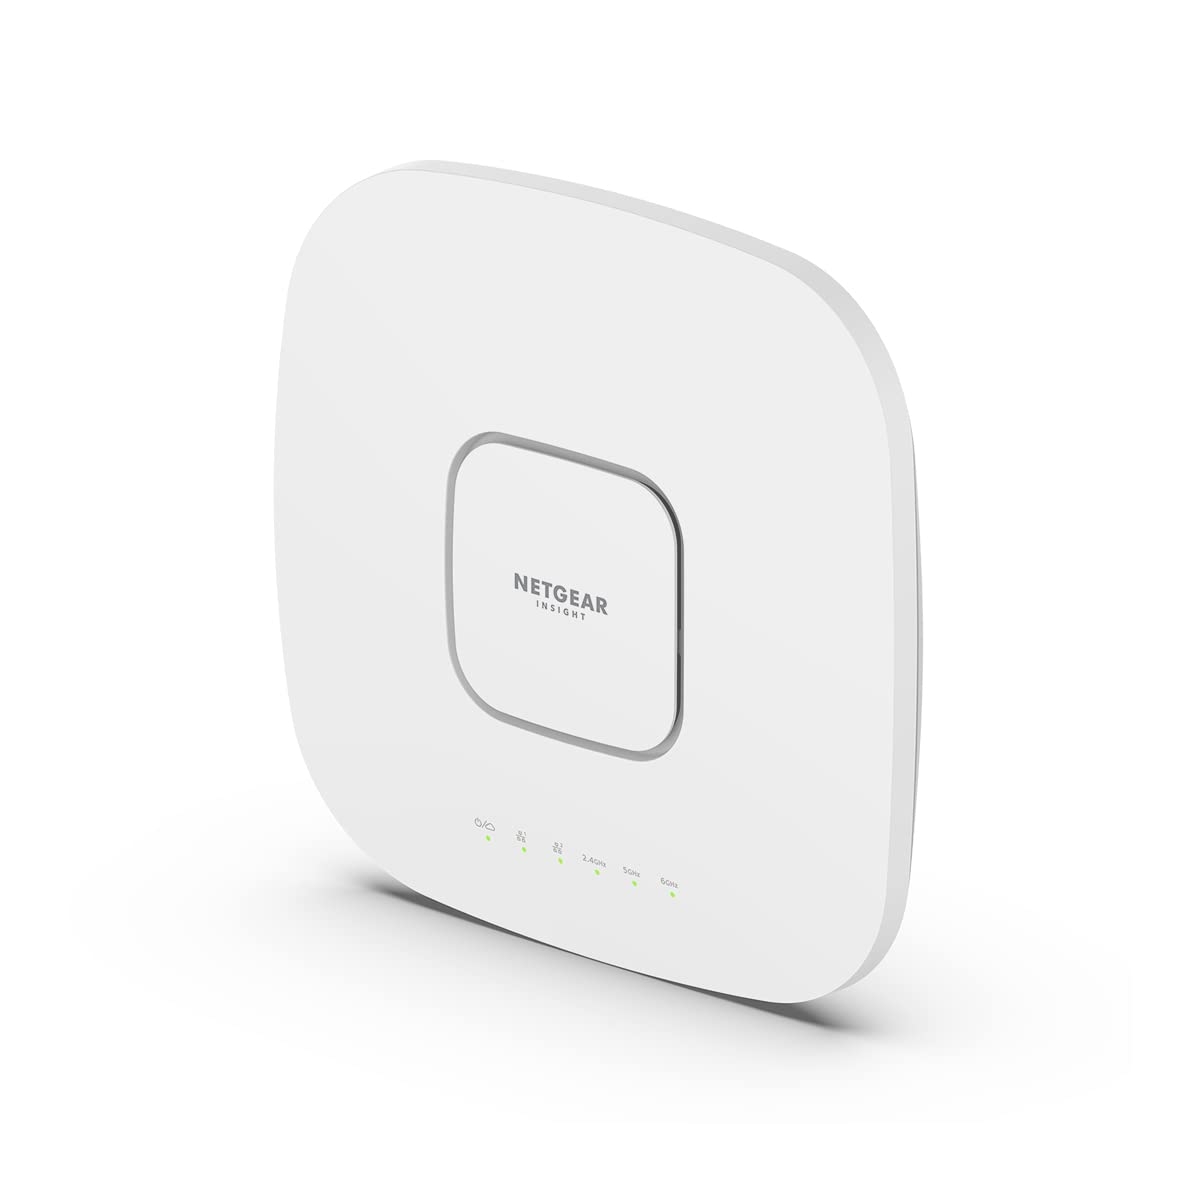 NETGEAR Cloud Managed Wireless Access Point (WAX630E) - WiFi 6E Tri-Band AXE7800 Speed | Mesh | MU-MIMO | 802.11ax | Insight Remote Management | PoE++ | Power Adapter not Included